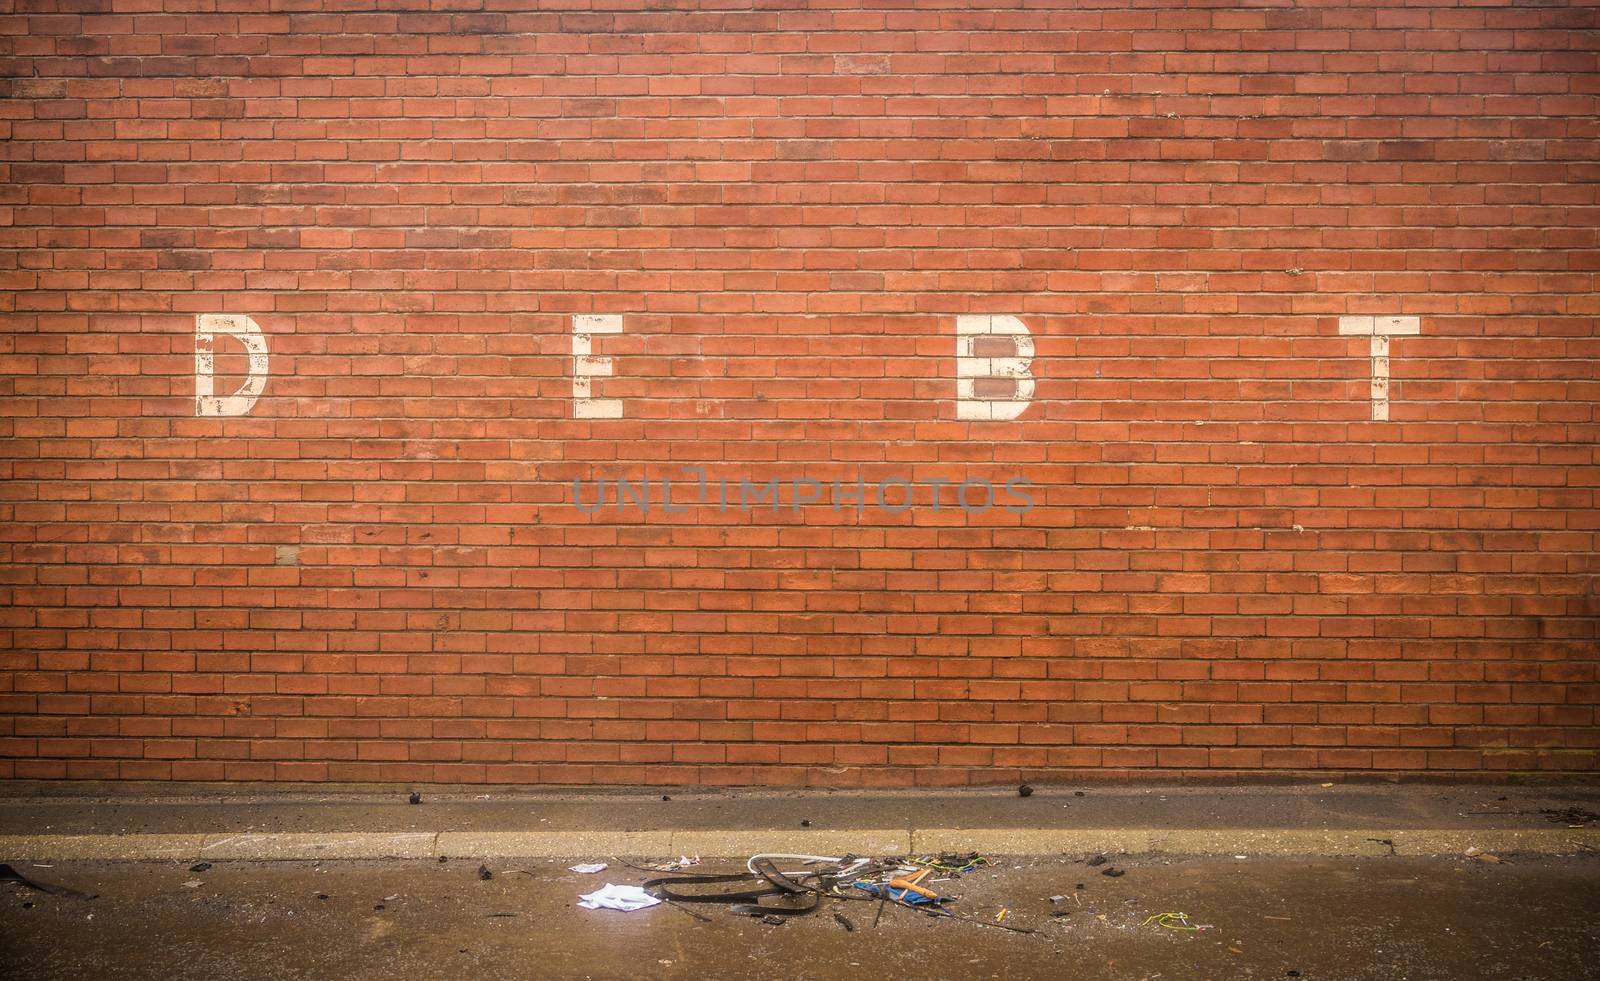 Grungy Red Brick Wall With The Word Debt